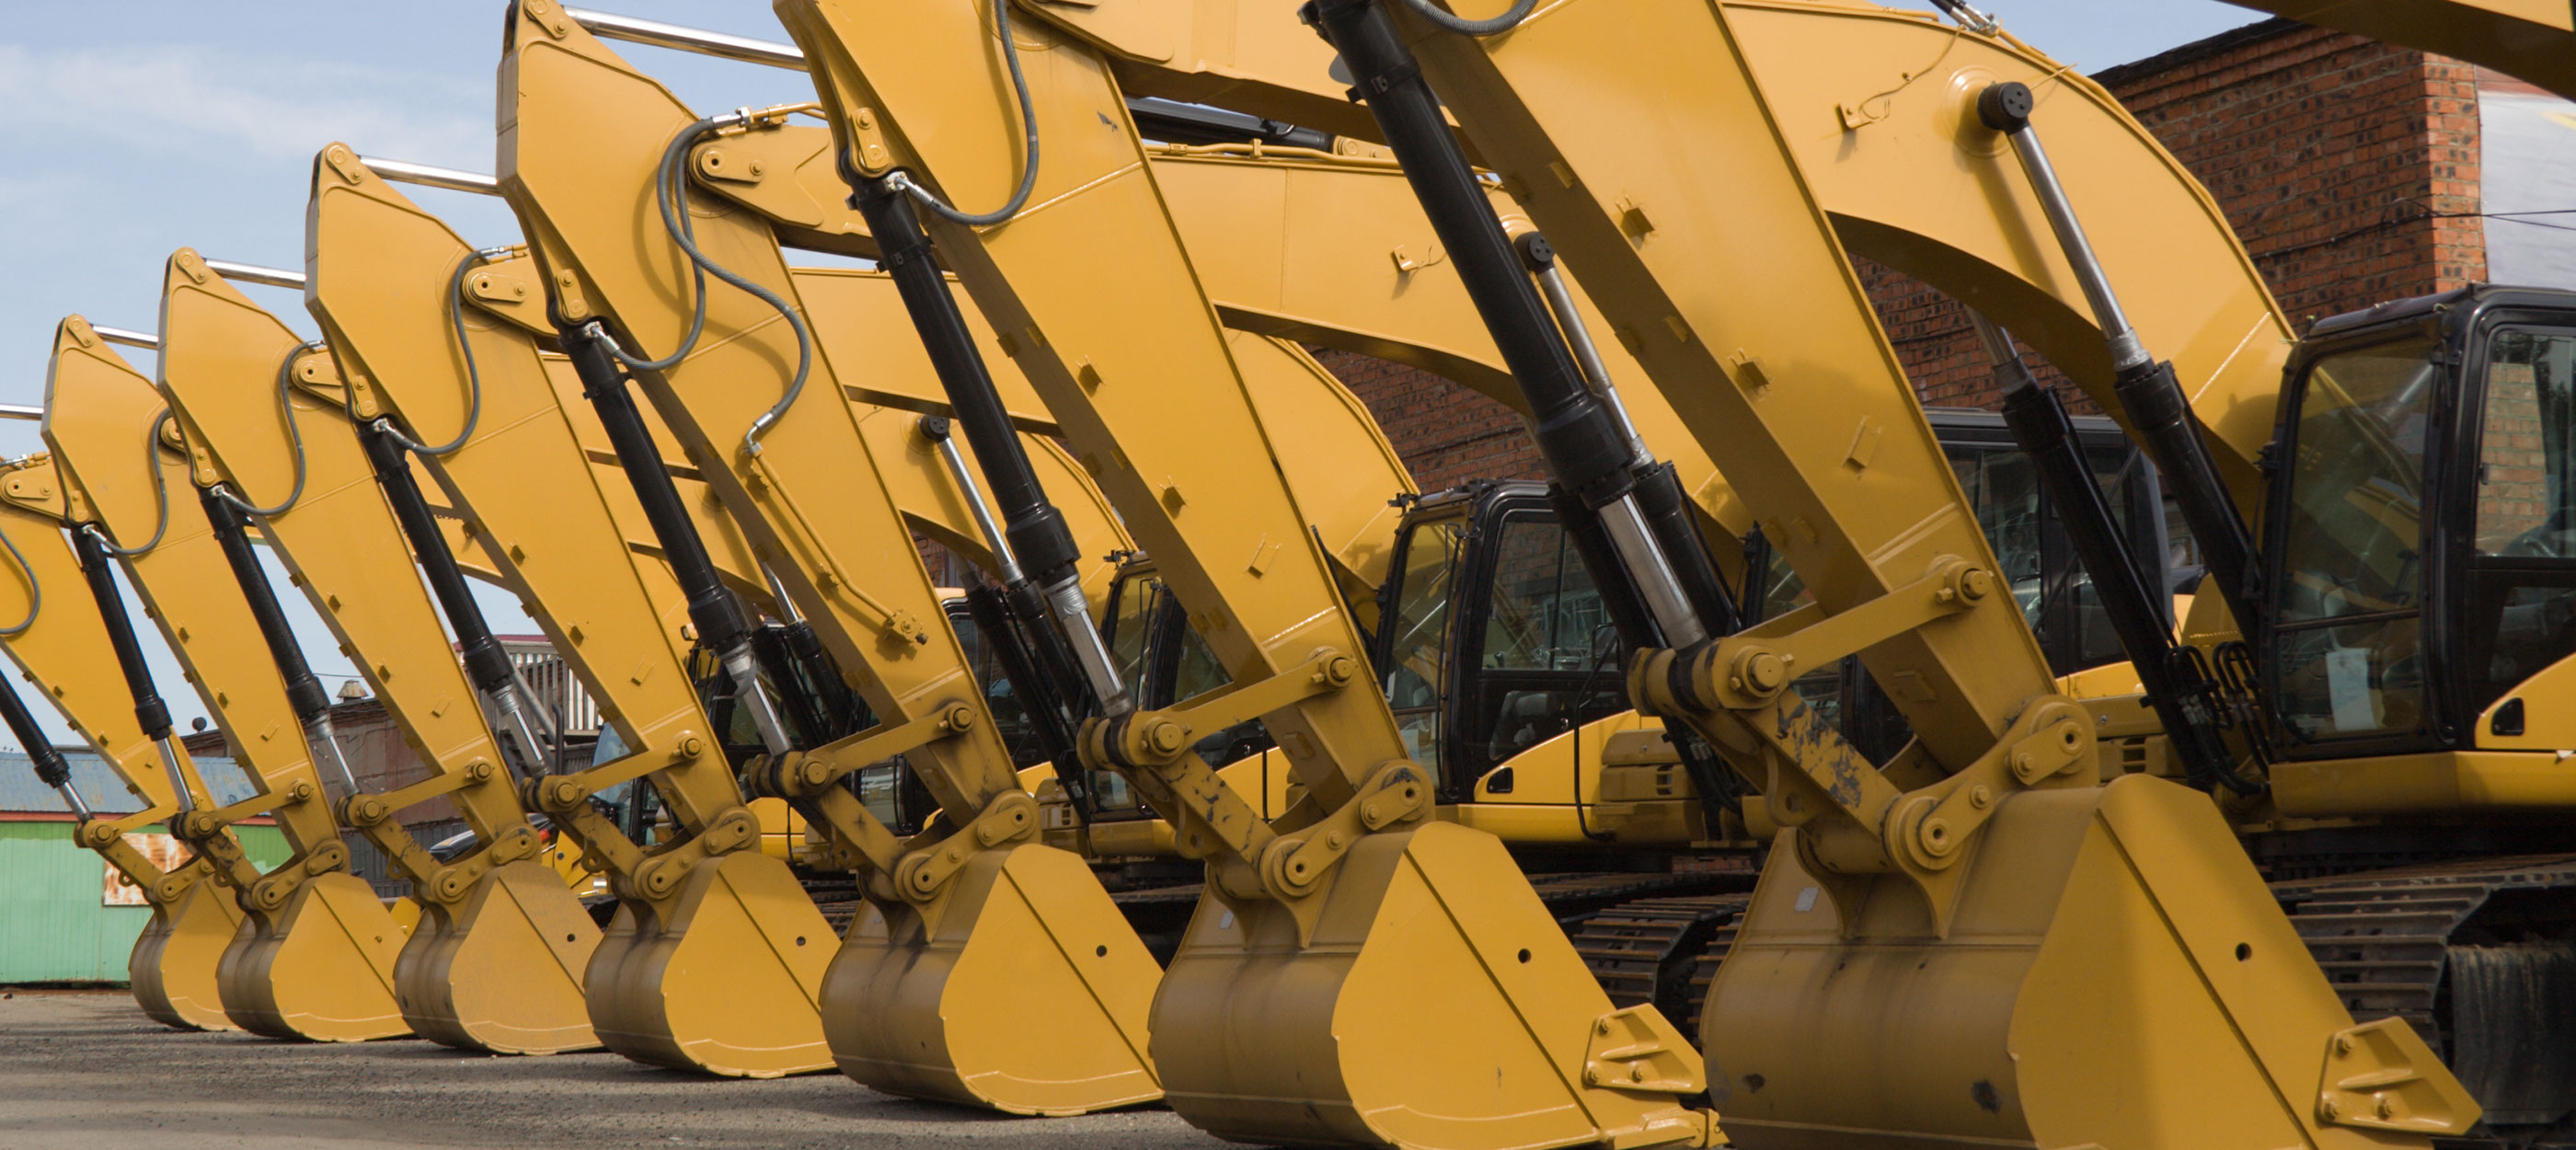 A row of parked backhoes